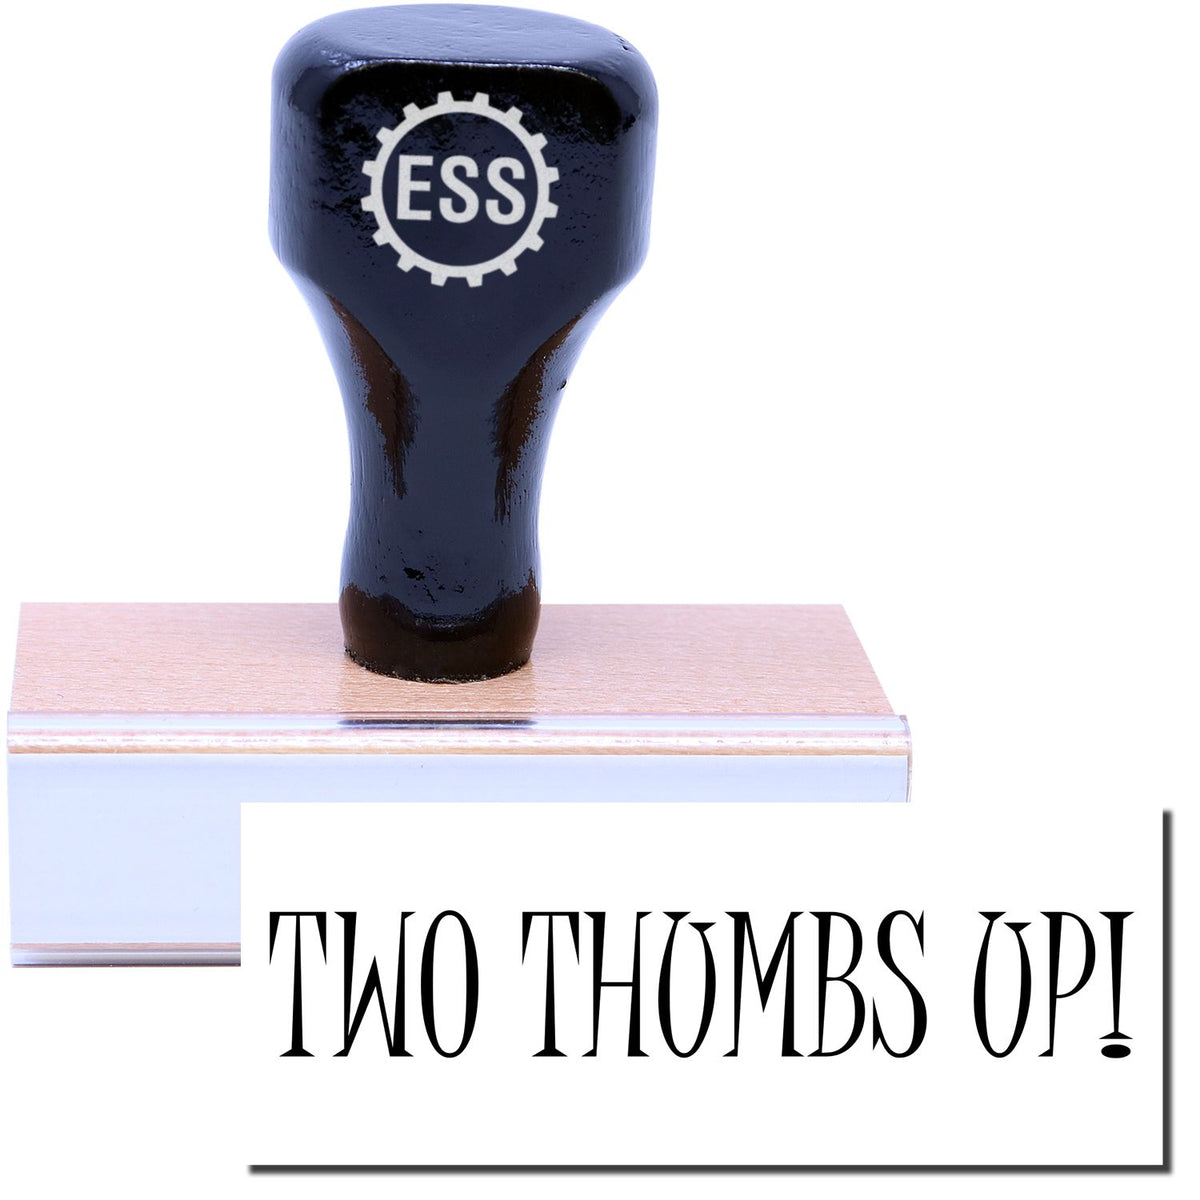 A stock office rubber stamp with a stamped image showing how the text &quot;TWO THUMBS UP!&quot; in a large font is displayed after stamping.